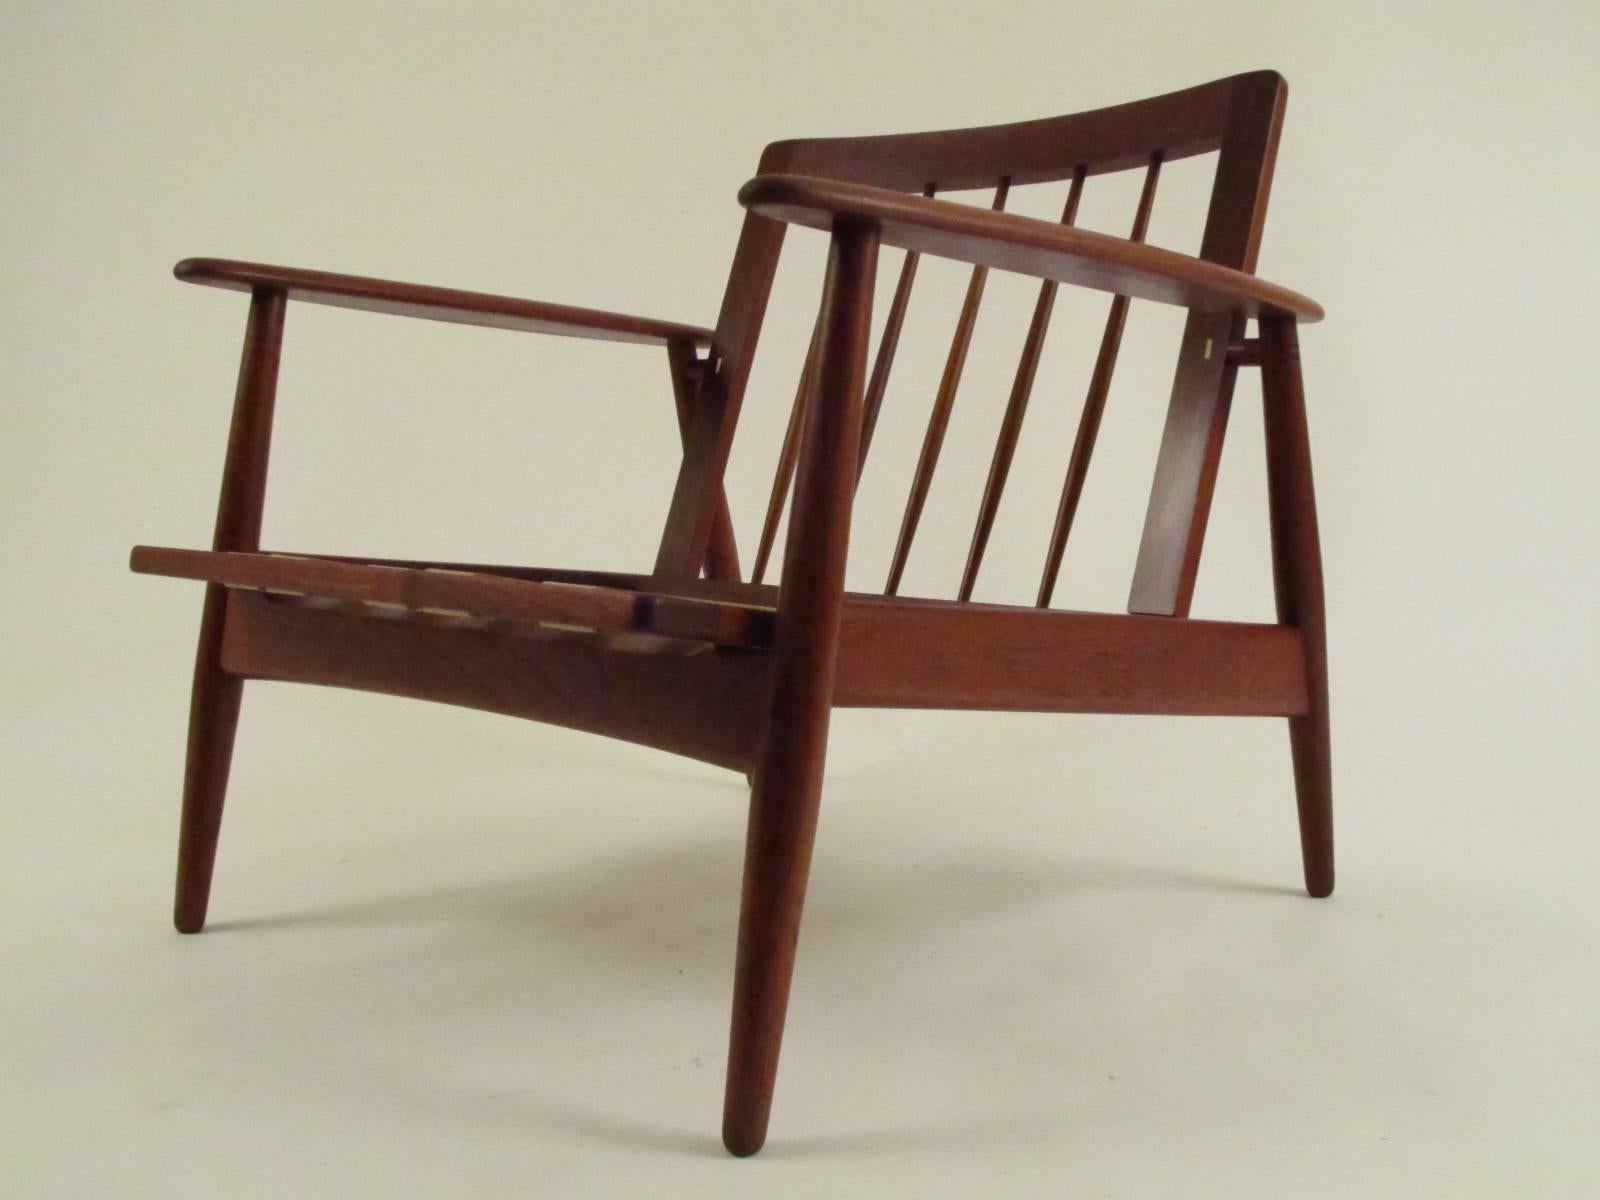 Single Danish Modern Teak Lounge Chair In Excellent Condition For Sale In Papaikou, HI